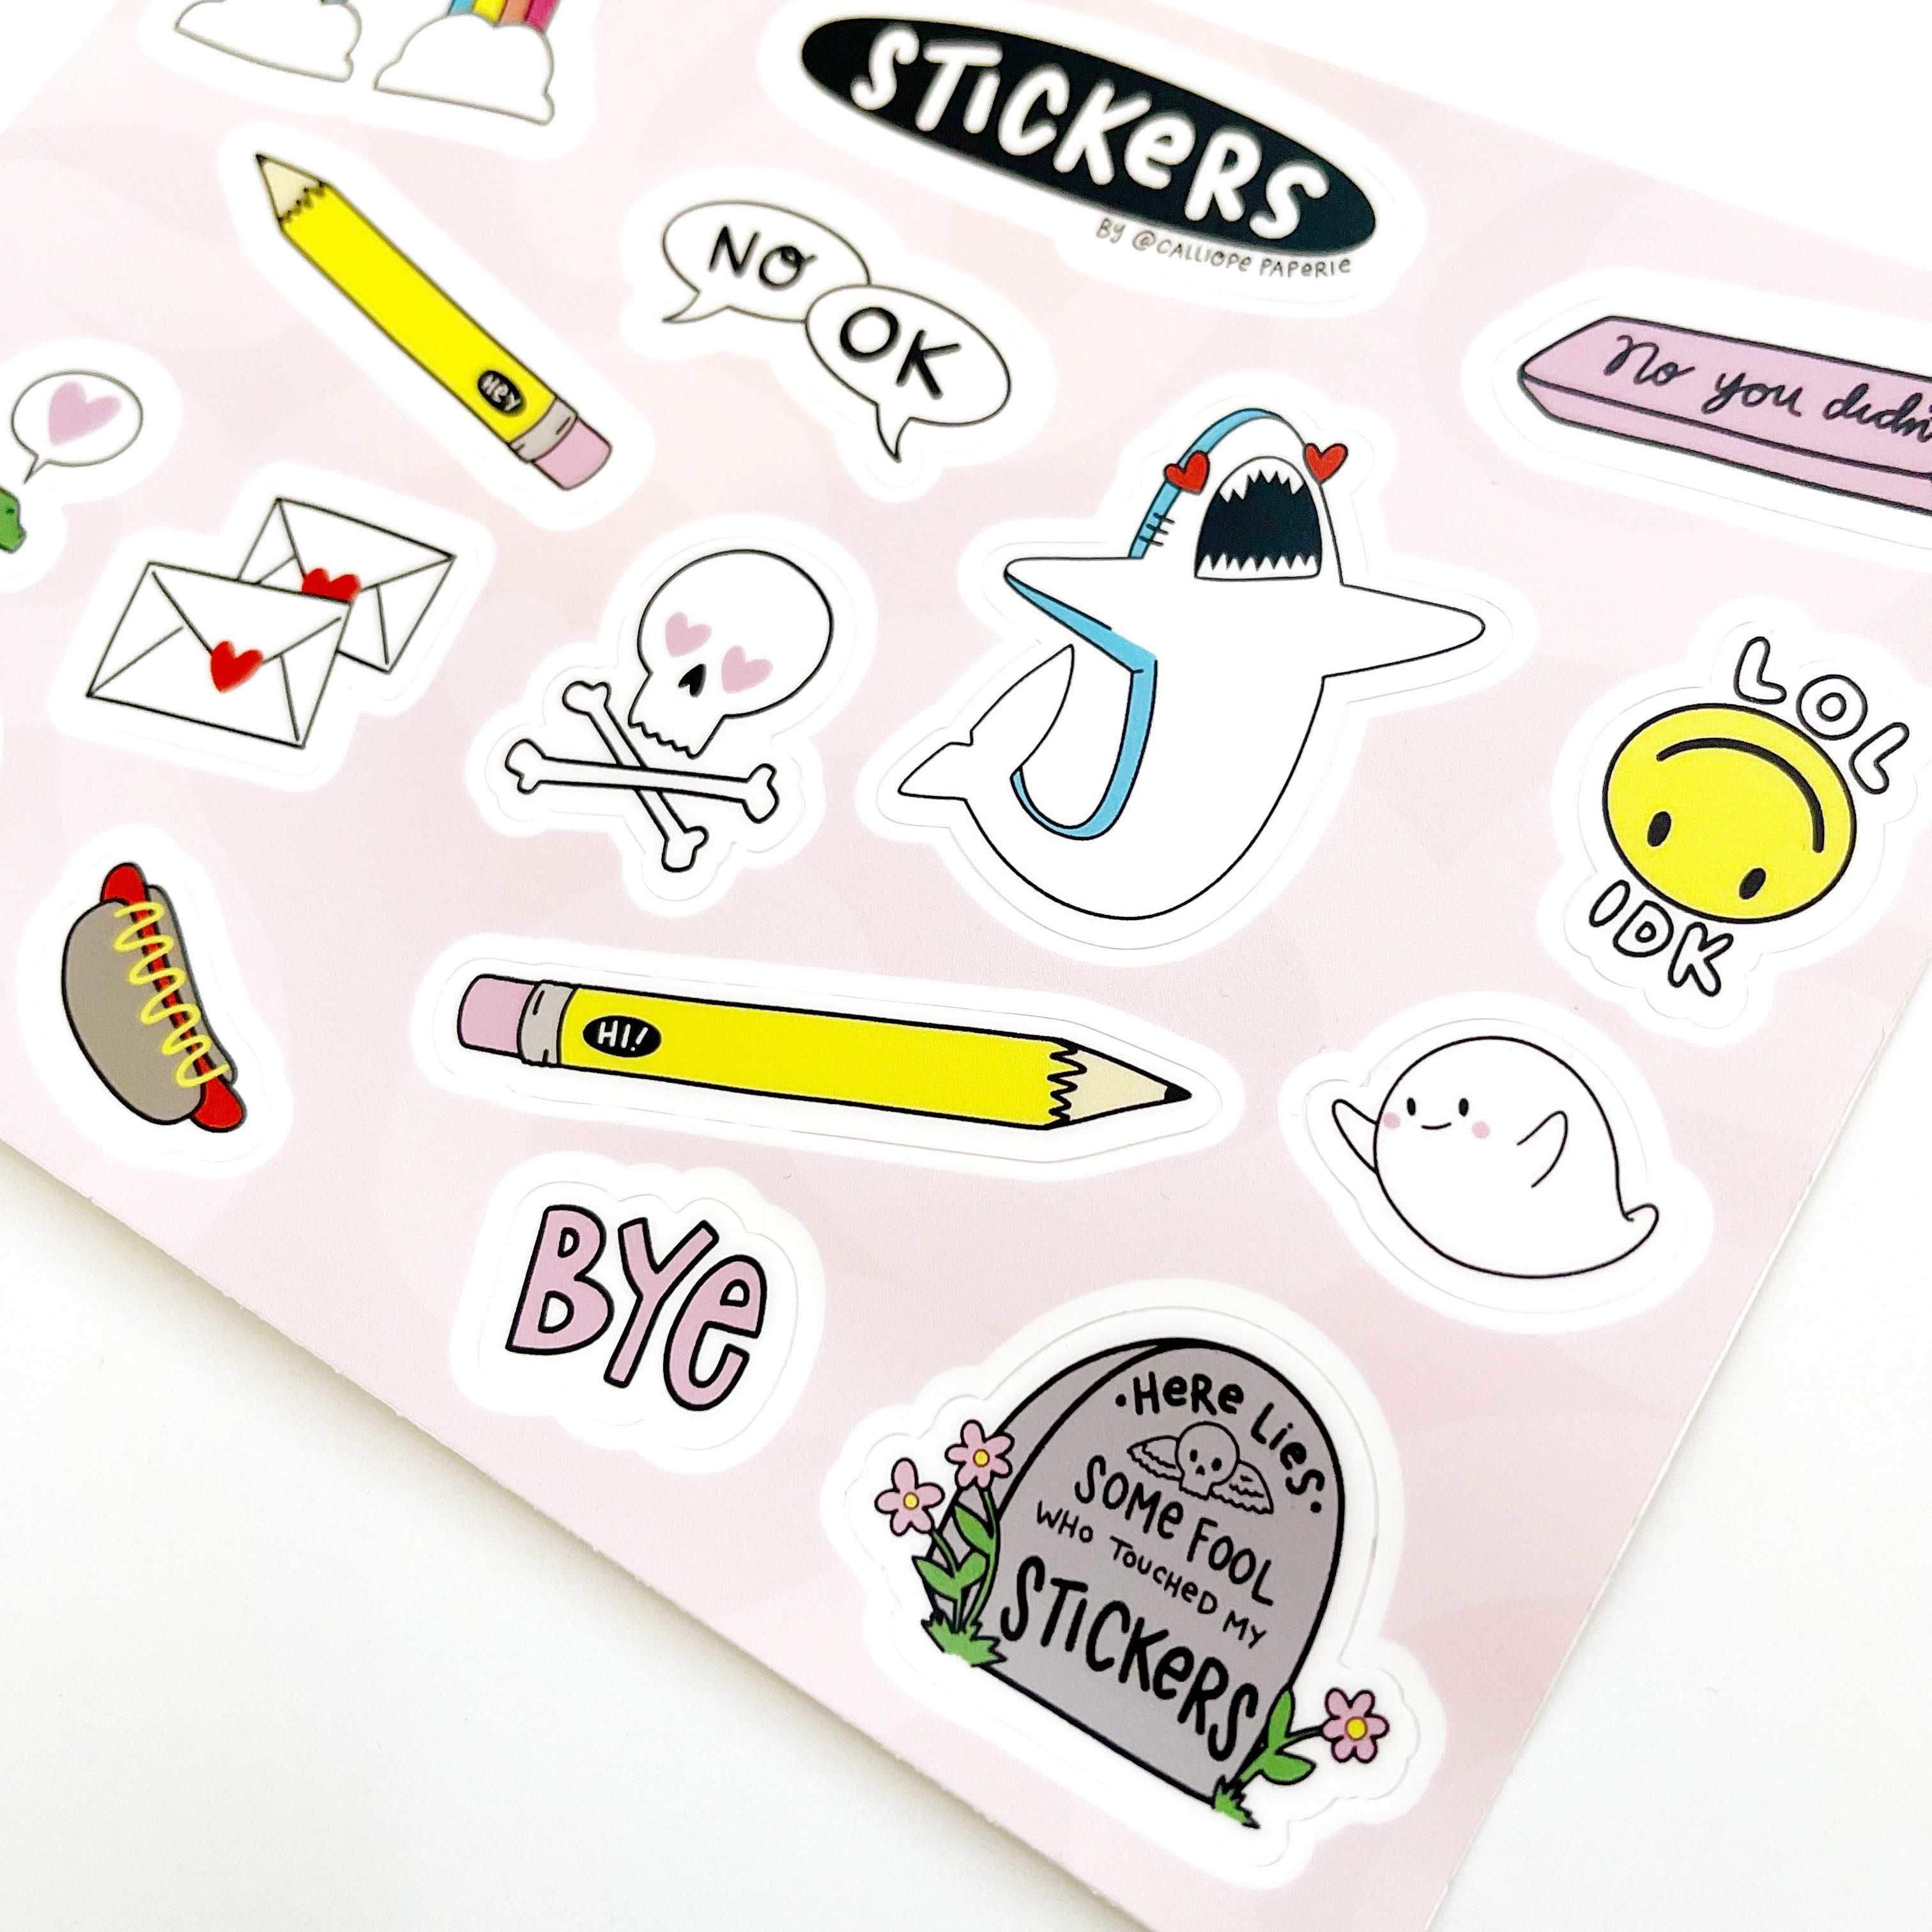 Pink background with sticker images of green dinosaur, yellow pencil, rainbow with clouds, shark, ghost, and pink eraser.